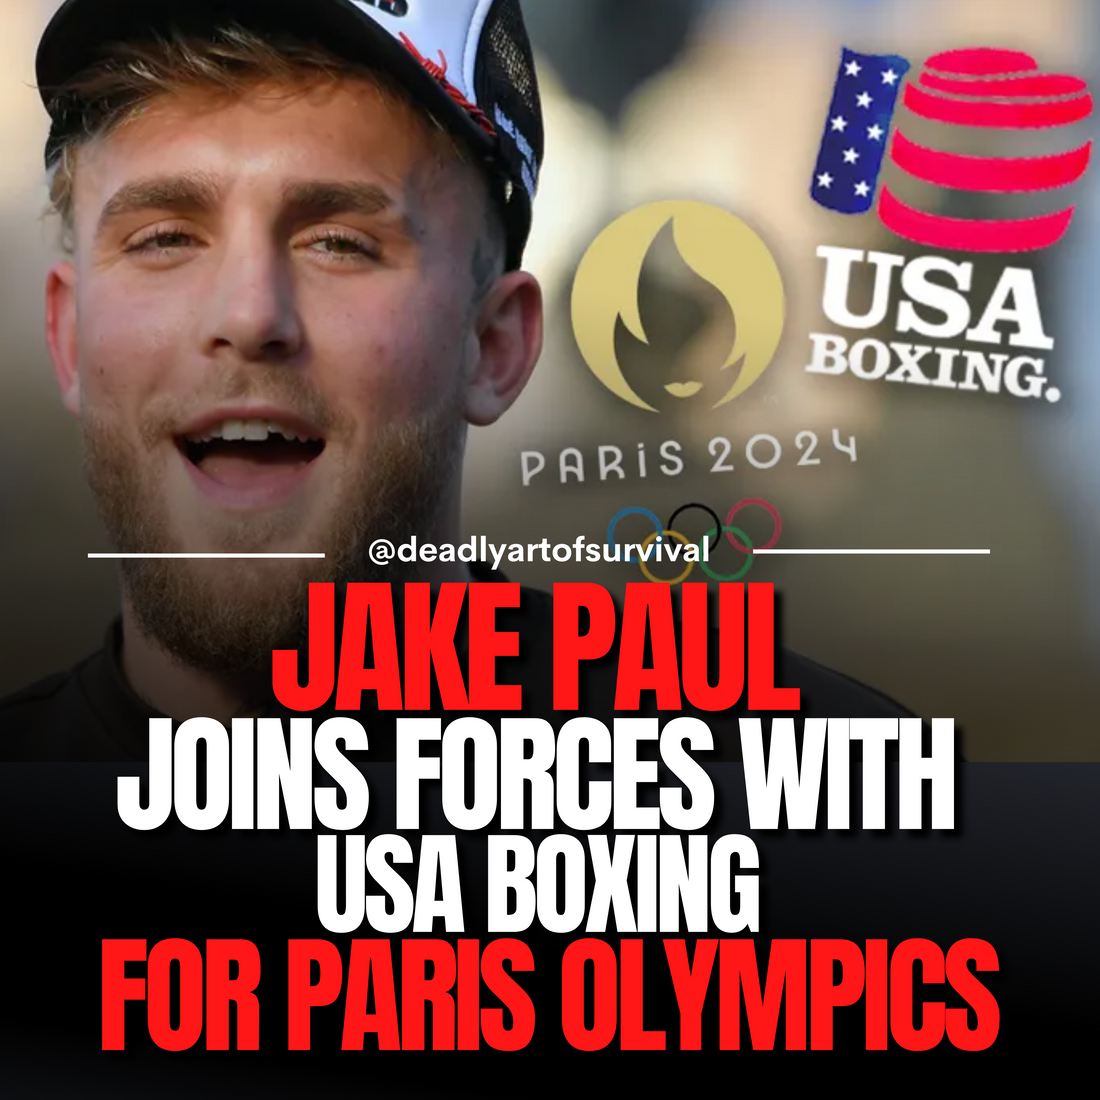 Jake Paul Joins Forces with USA Boxing for Paris Olympics, To Mentor Athletes